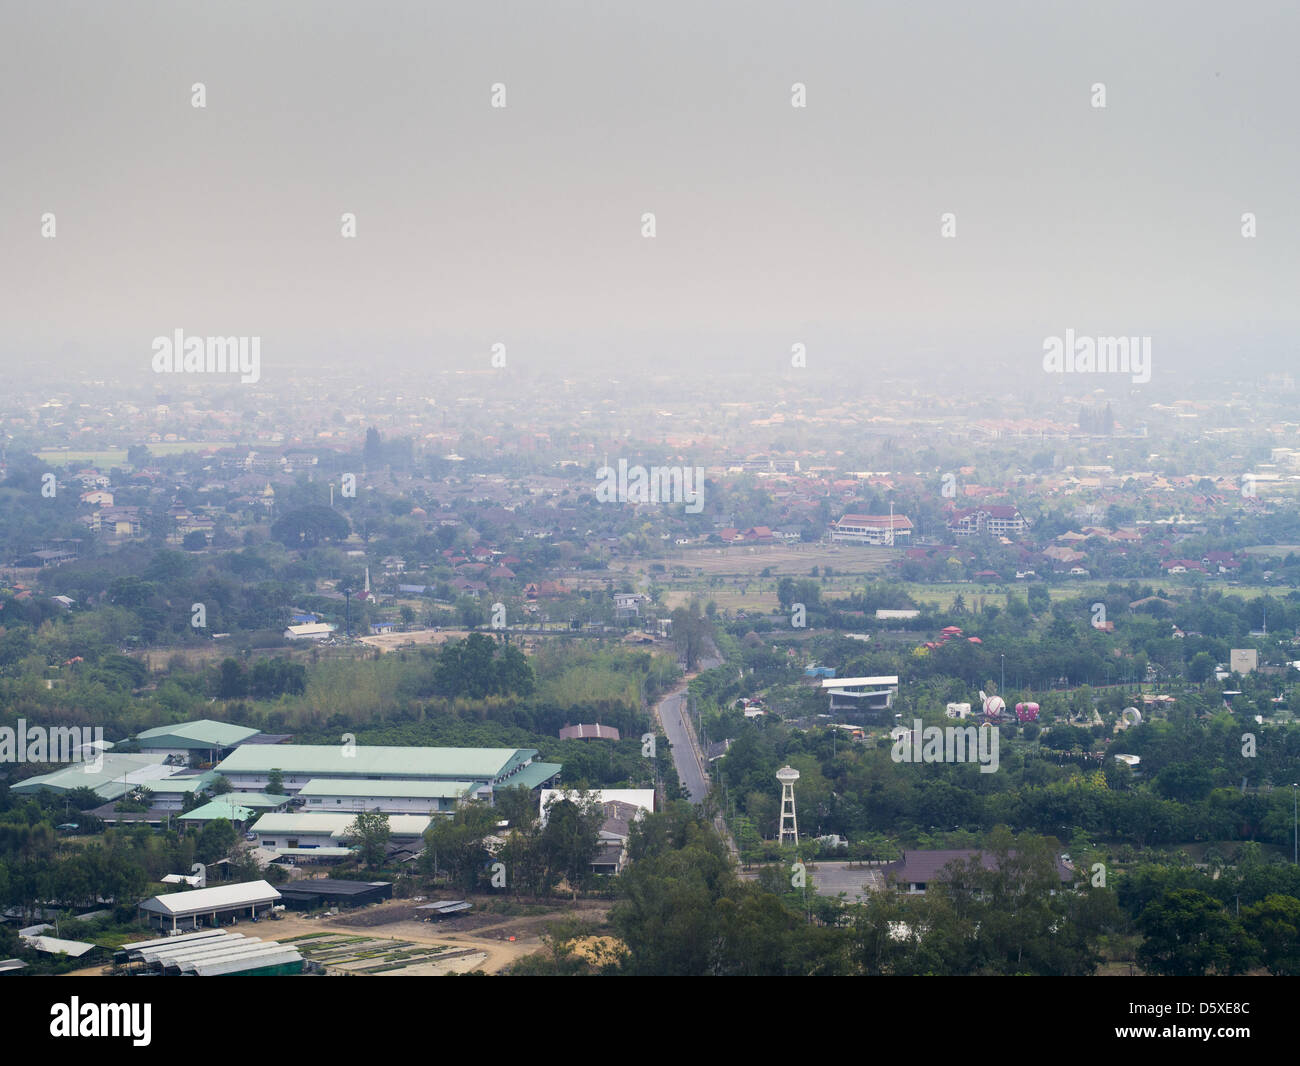 April 6, 2013 - Chiang Mai, Chiang Mai, Thailand - The view from the scenic overlook at Wat Phra That Doi Kham (Temple of the Golden Mountain) in Chiang Mai is obscured by smoke from illegal burning going on around the city. The ''burning season,'' which roughly goes from late February to late April, is when farmers in northern Thailand burn the dead grass and last year's stubble out of their fields. The burning creates clouds of smoke that causes breathing problems, reduces visibility and contributes to global warming. The Thai government has banned the burning and is making an effort to cont Stock Photo